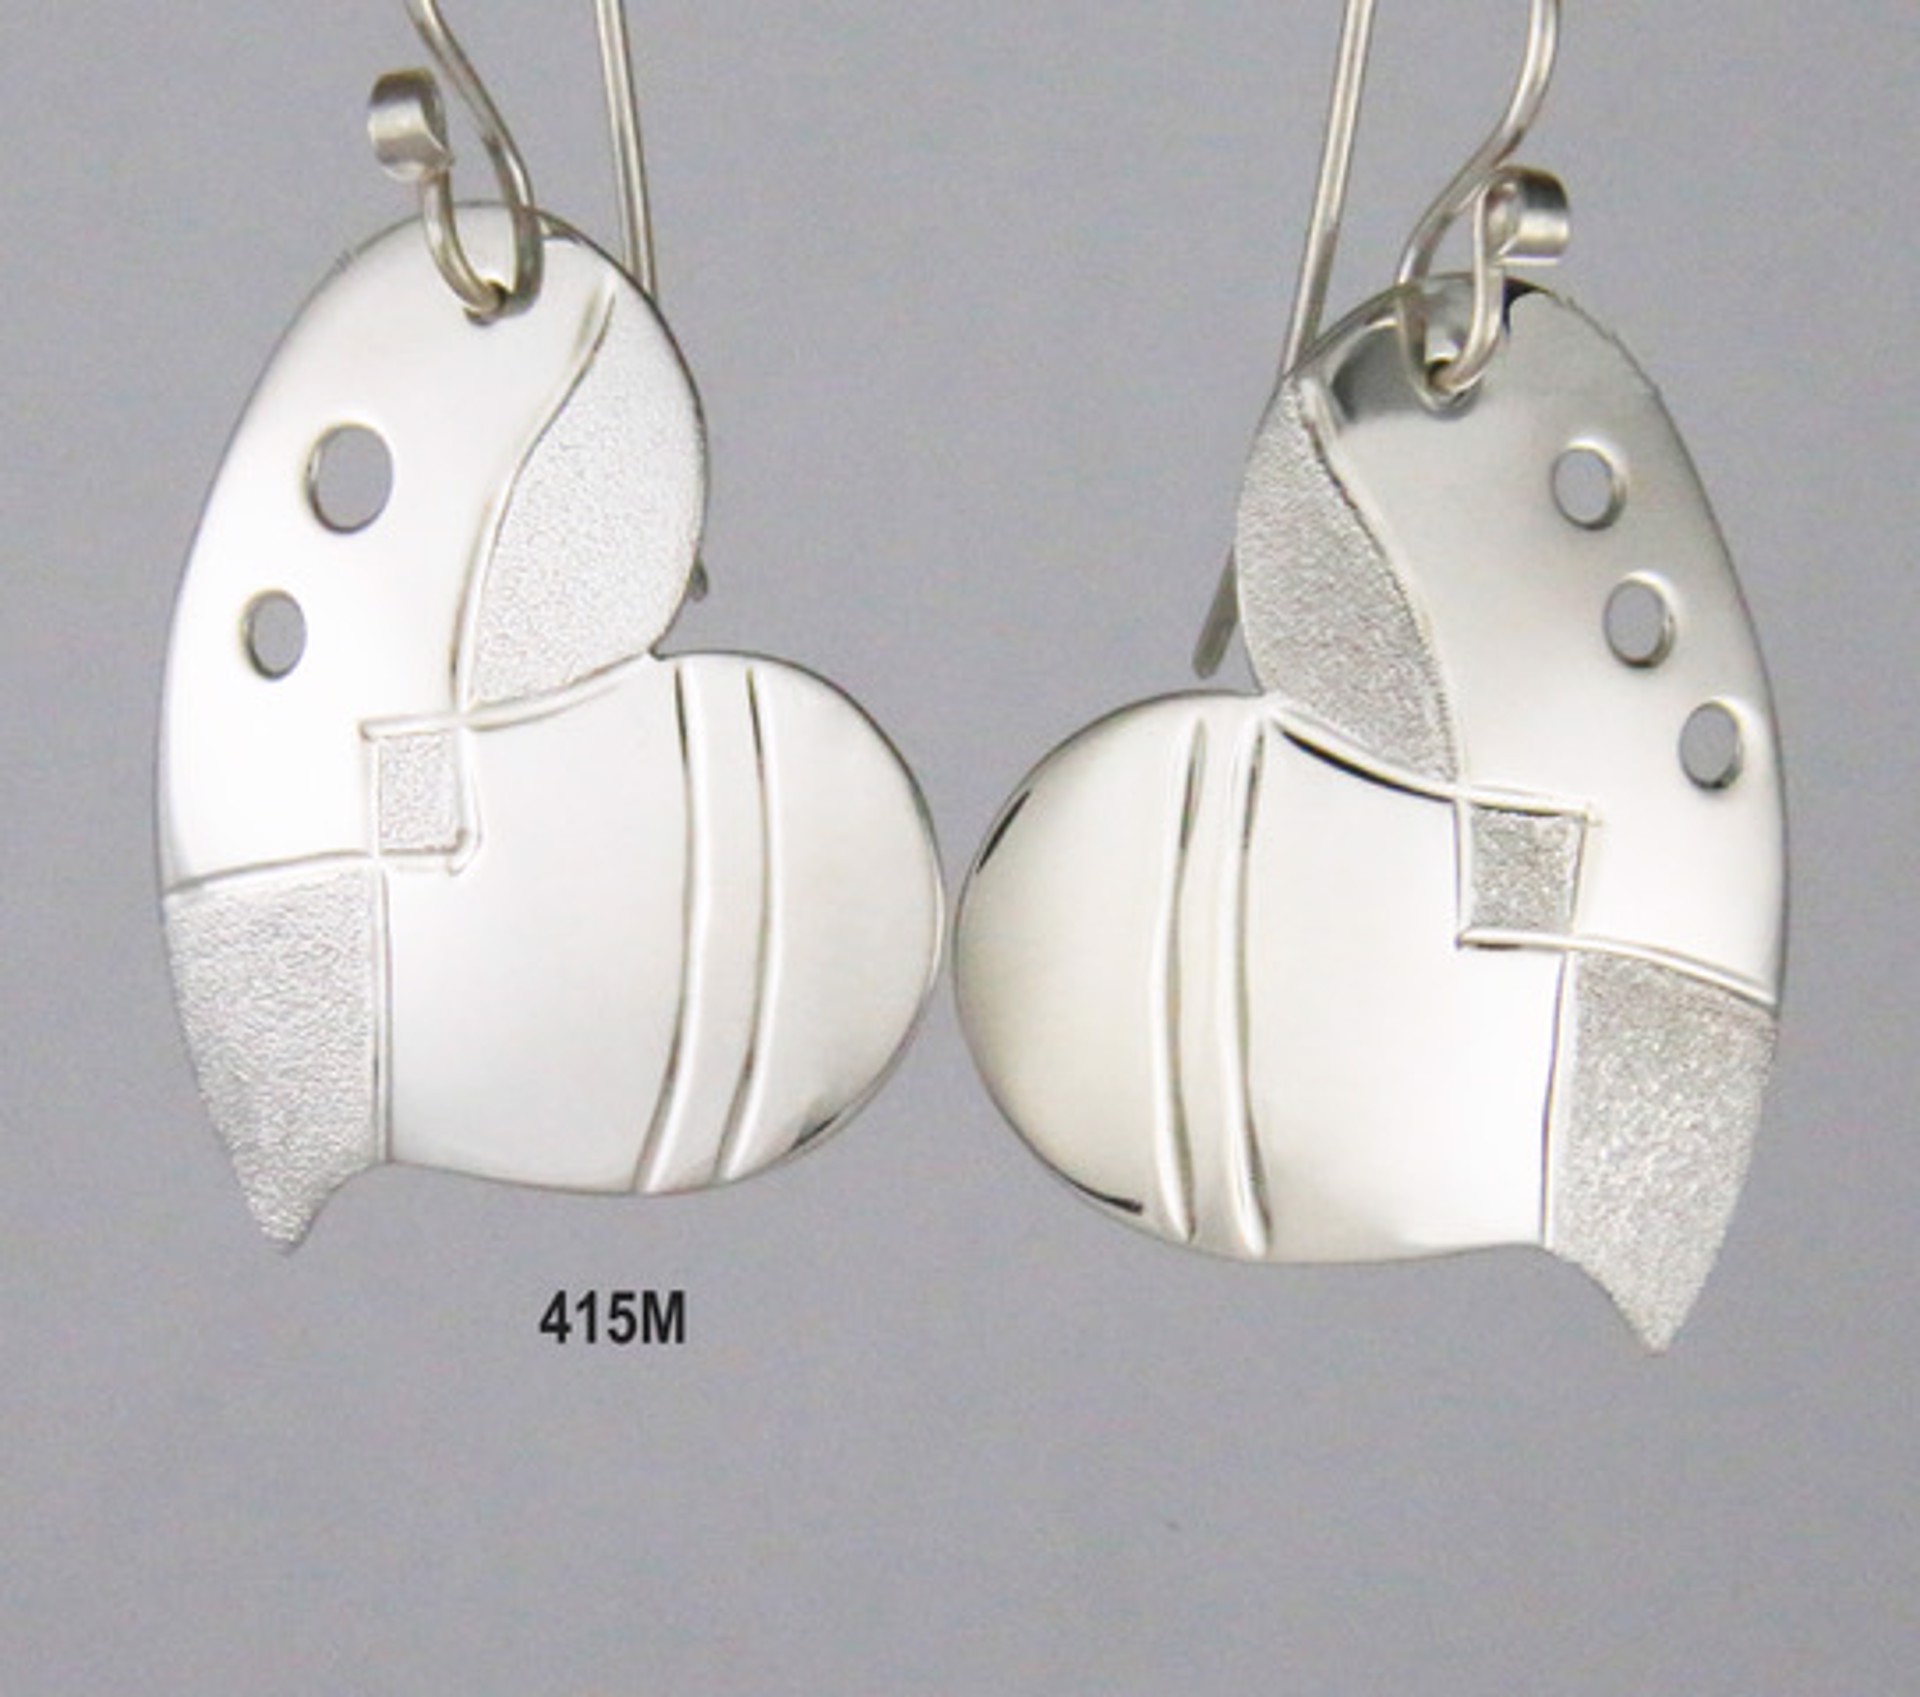 Earrings - Heart Hand Engraved Sterling Silver - #415M by Ken and Barbara Newman